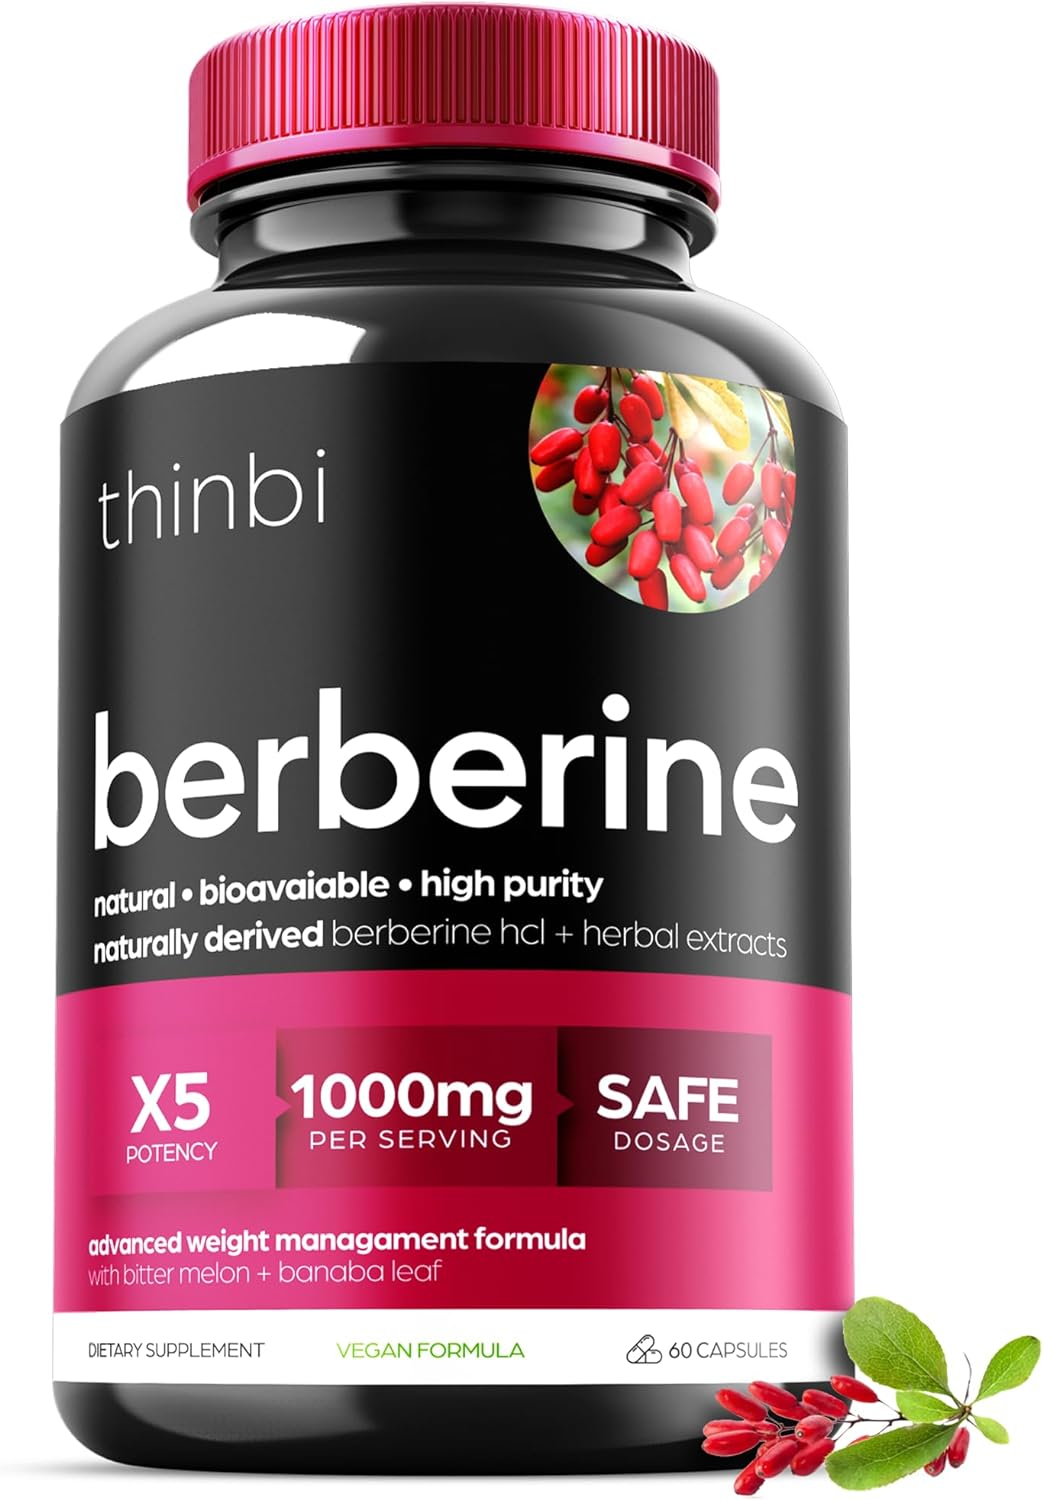 Artnaturals Berberine Supplement 1000mg Potent Botanical Capsules for Weight Management with Bitter Melon and Banaba Leaf - HCl from Barberry Extract- 30 Servings